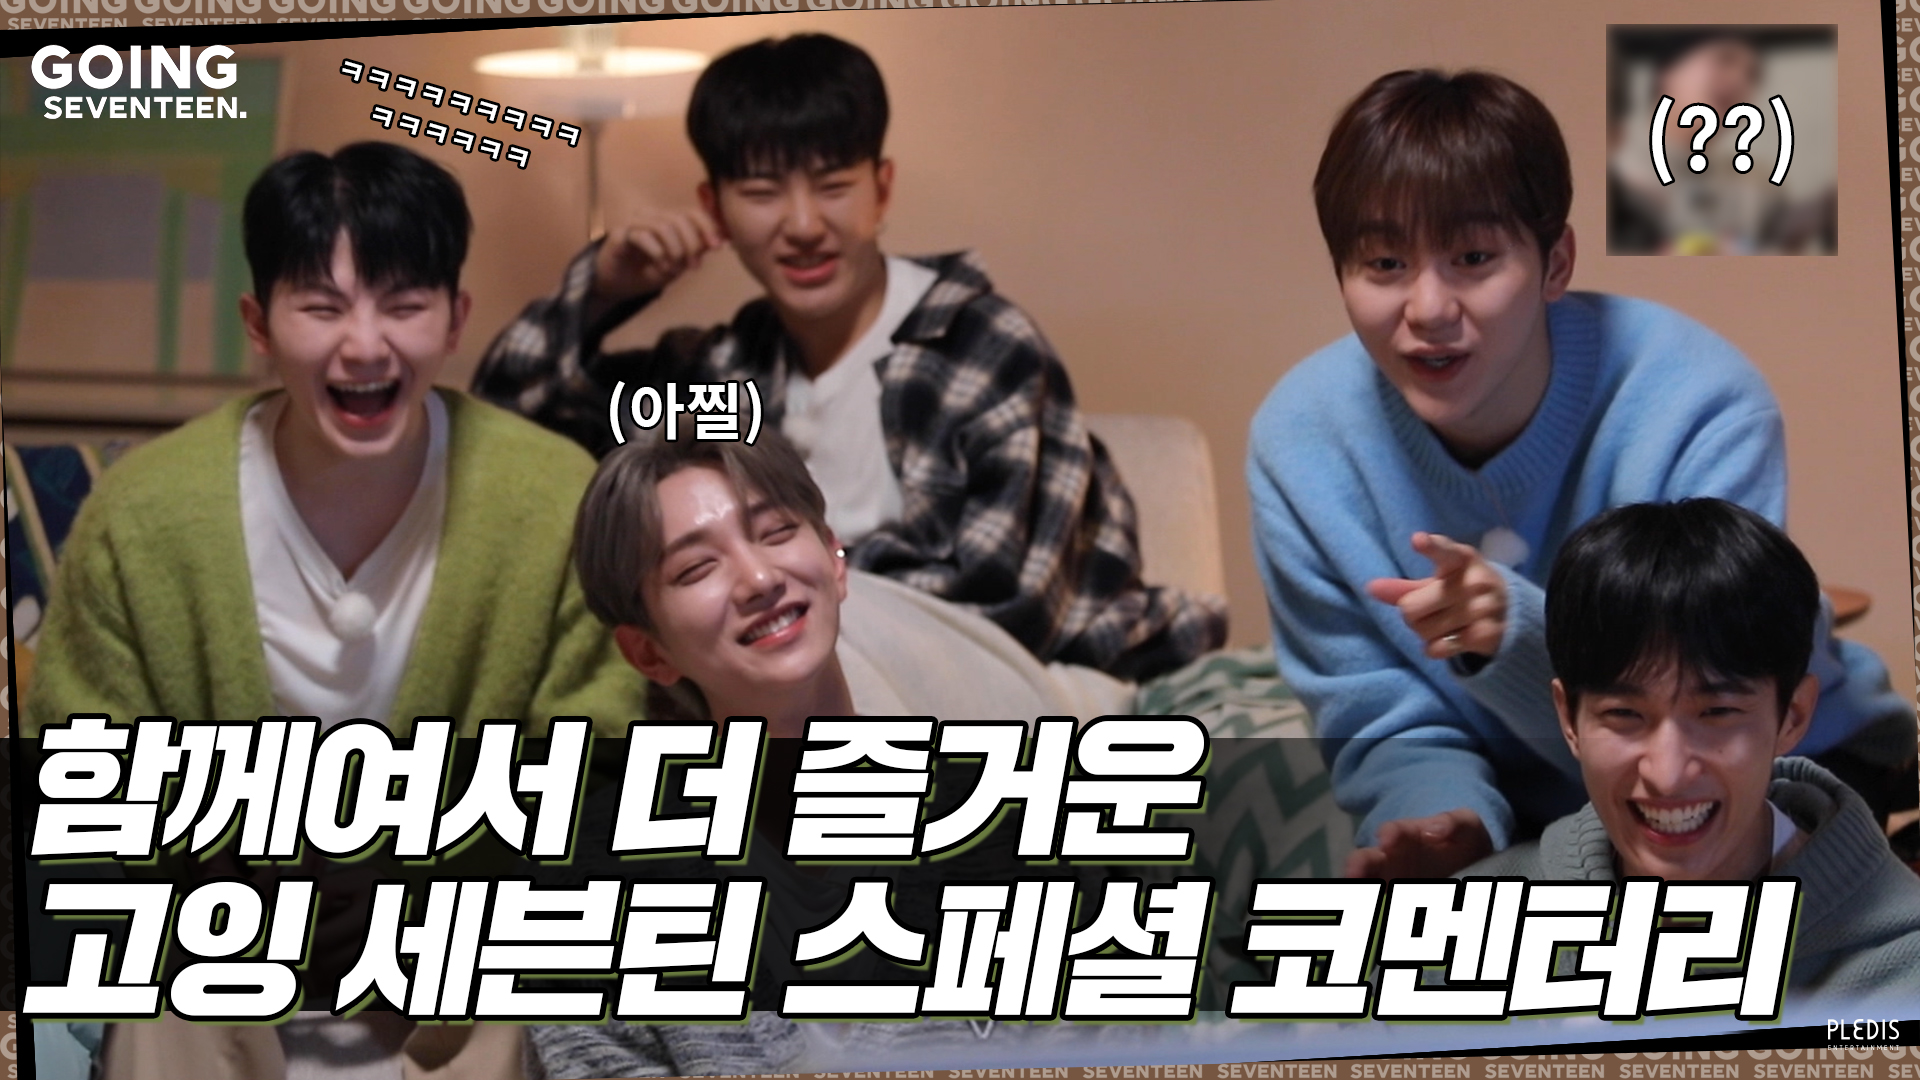 [GOING SEVENTEEN SPECIAL] 고잉 코멘터리 (GOING COMMENTARY)